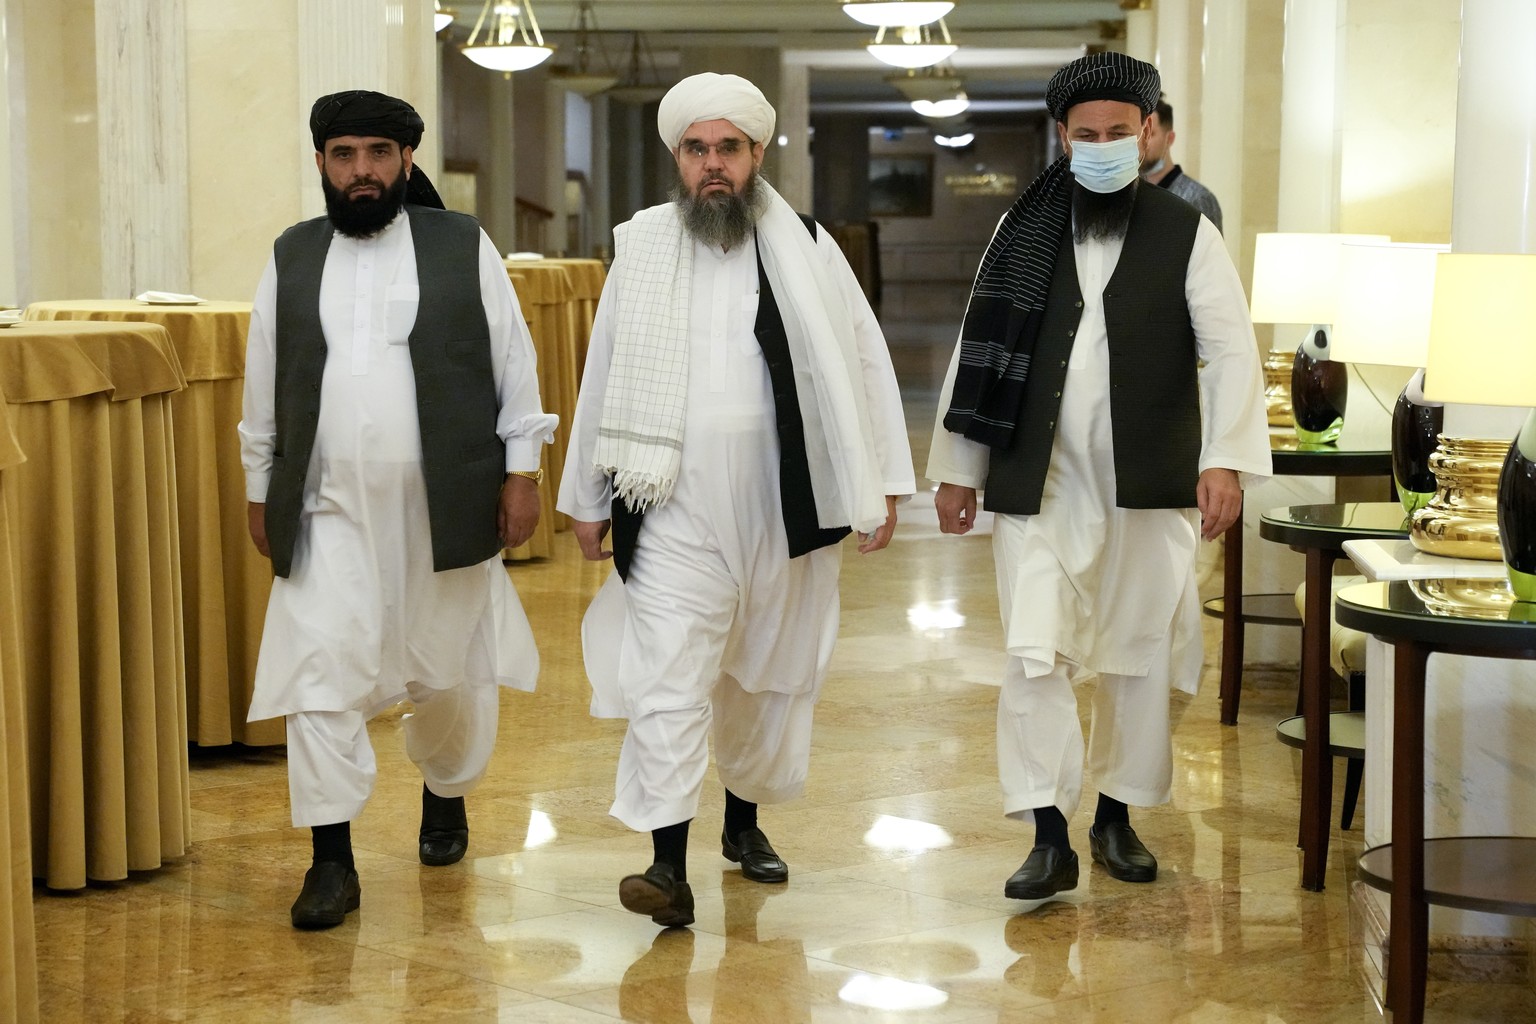 FILE In this file photo taken on Friday, July 9, 2021, Members of political delegation from the Afghan Taliban's movement Suhil Shaheen, left, Mawlawi Shahabuddin Dilawar, center, and Dr, Mohammad Nai ...